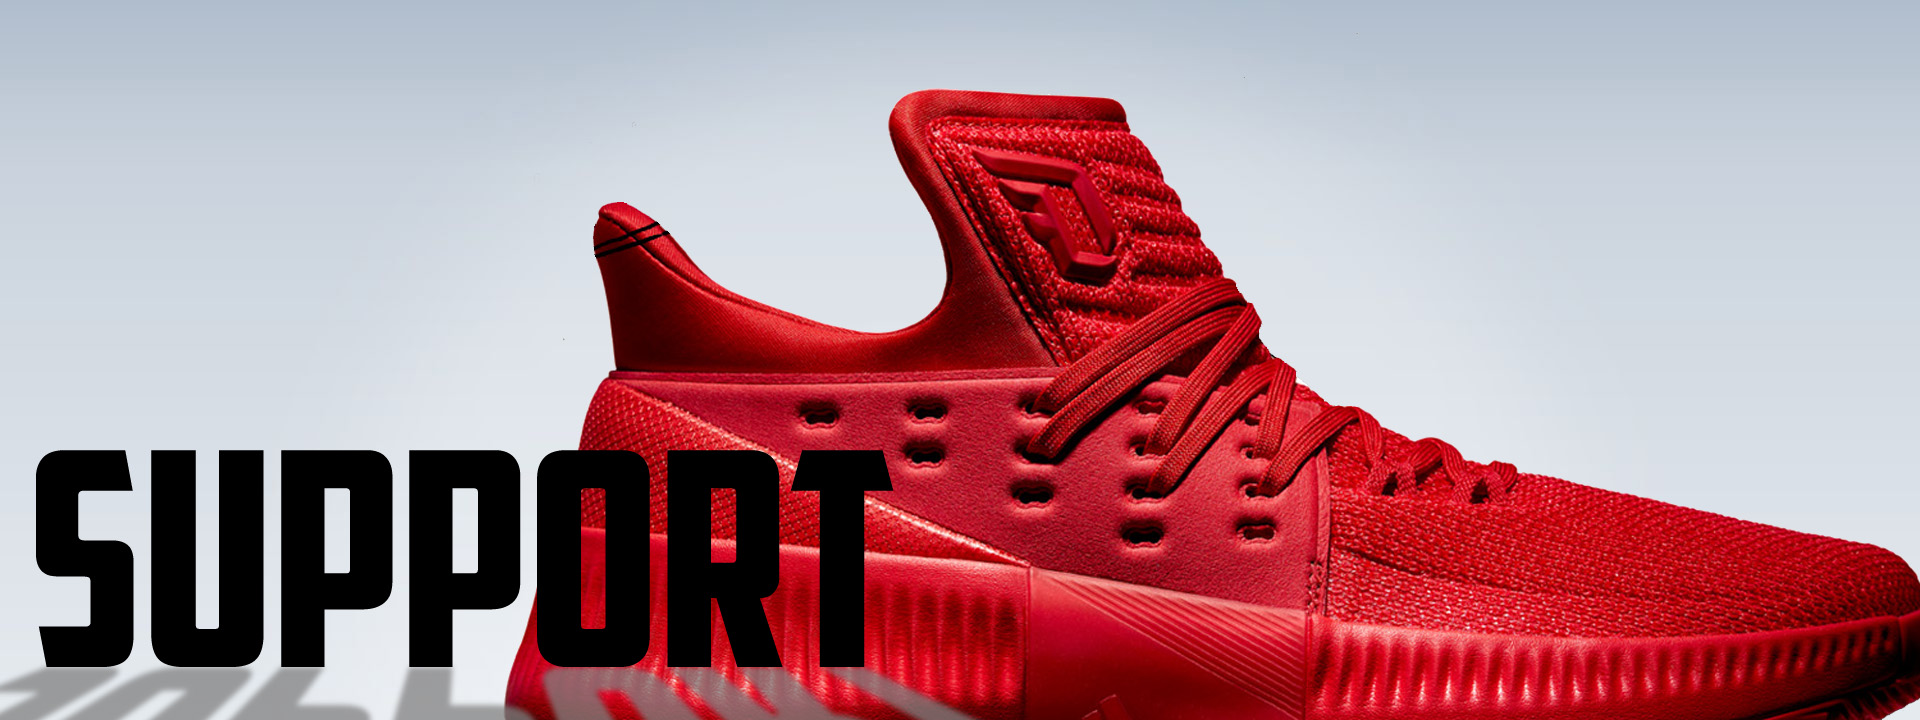 adidas dame 3 performance review support